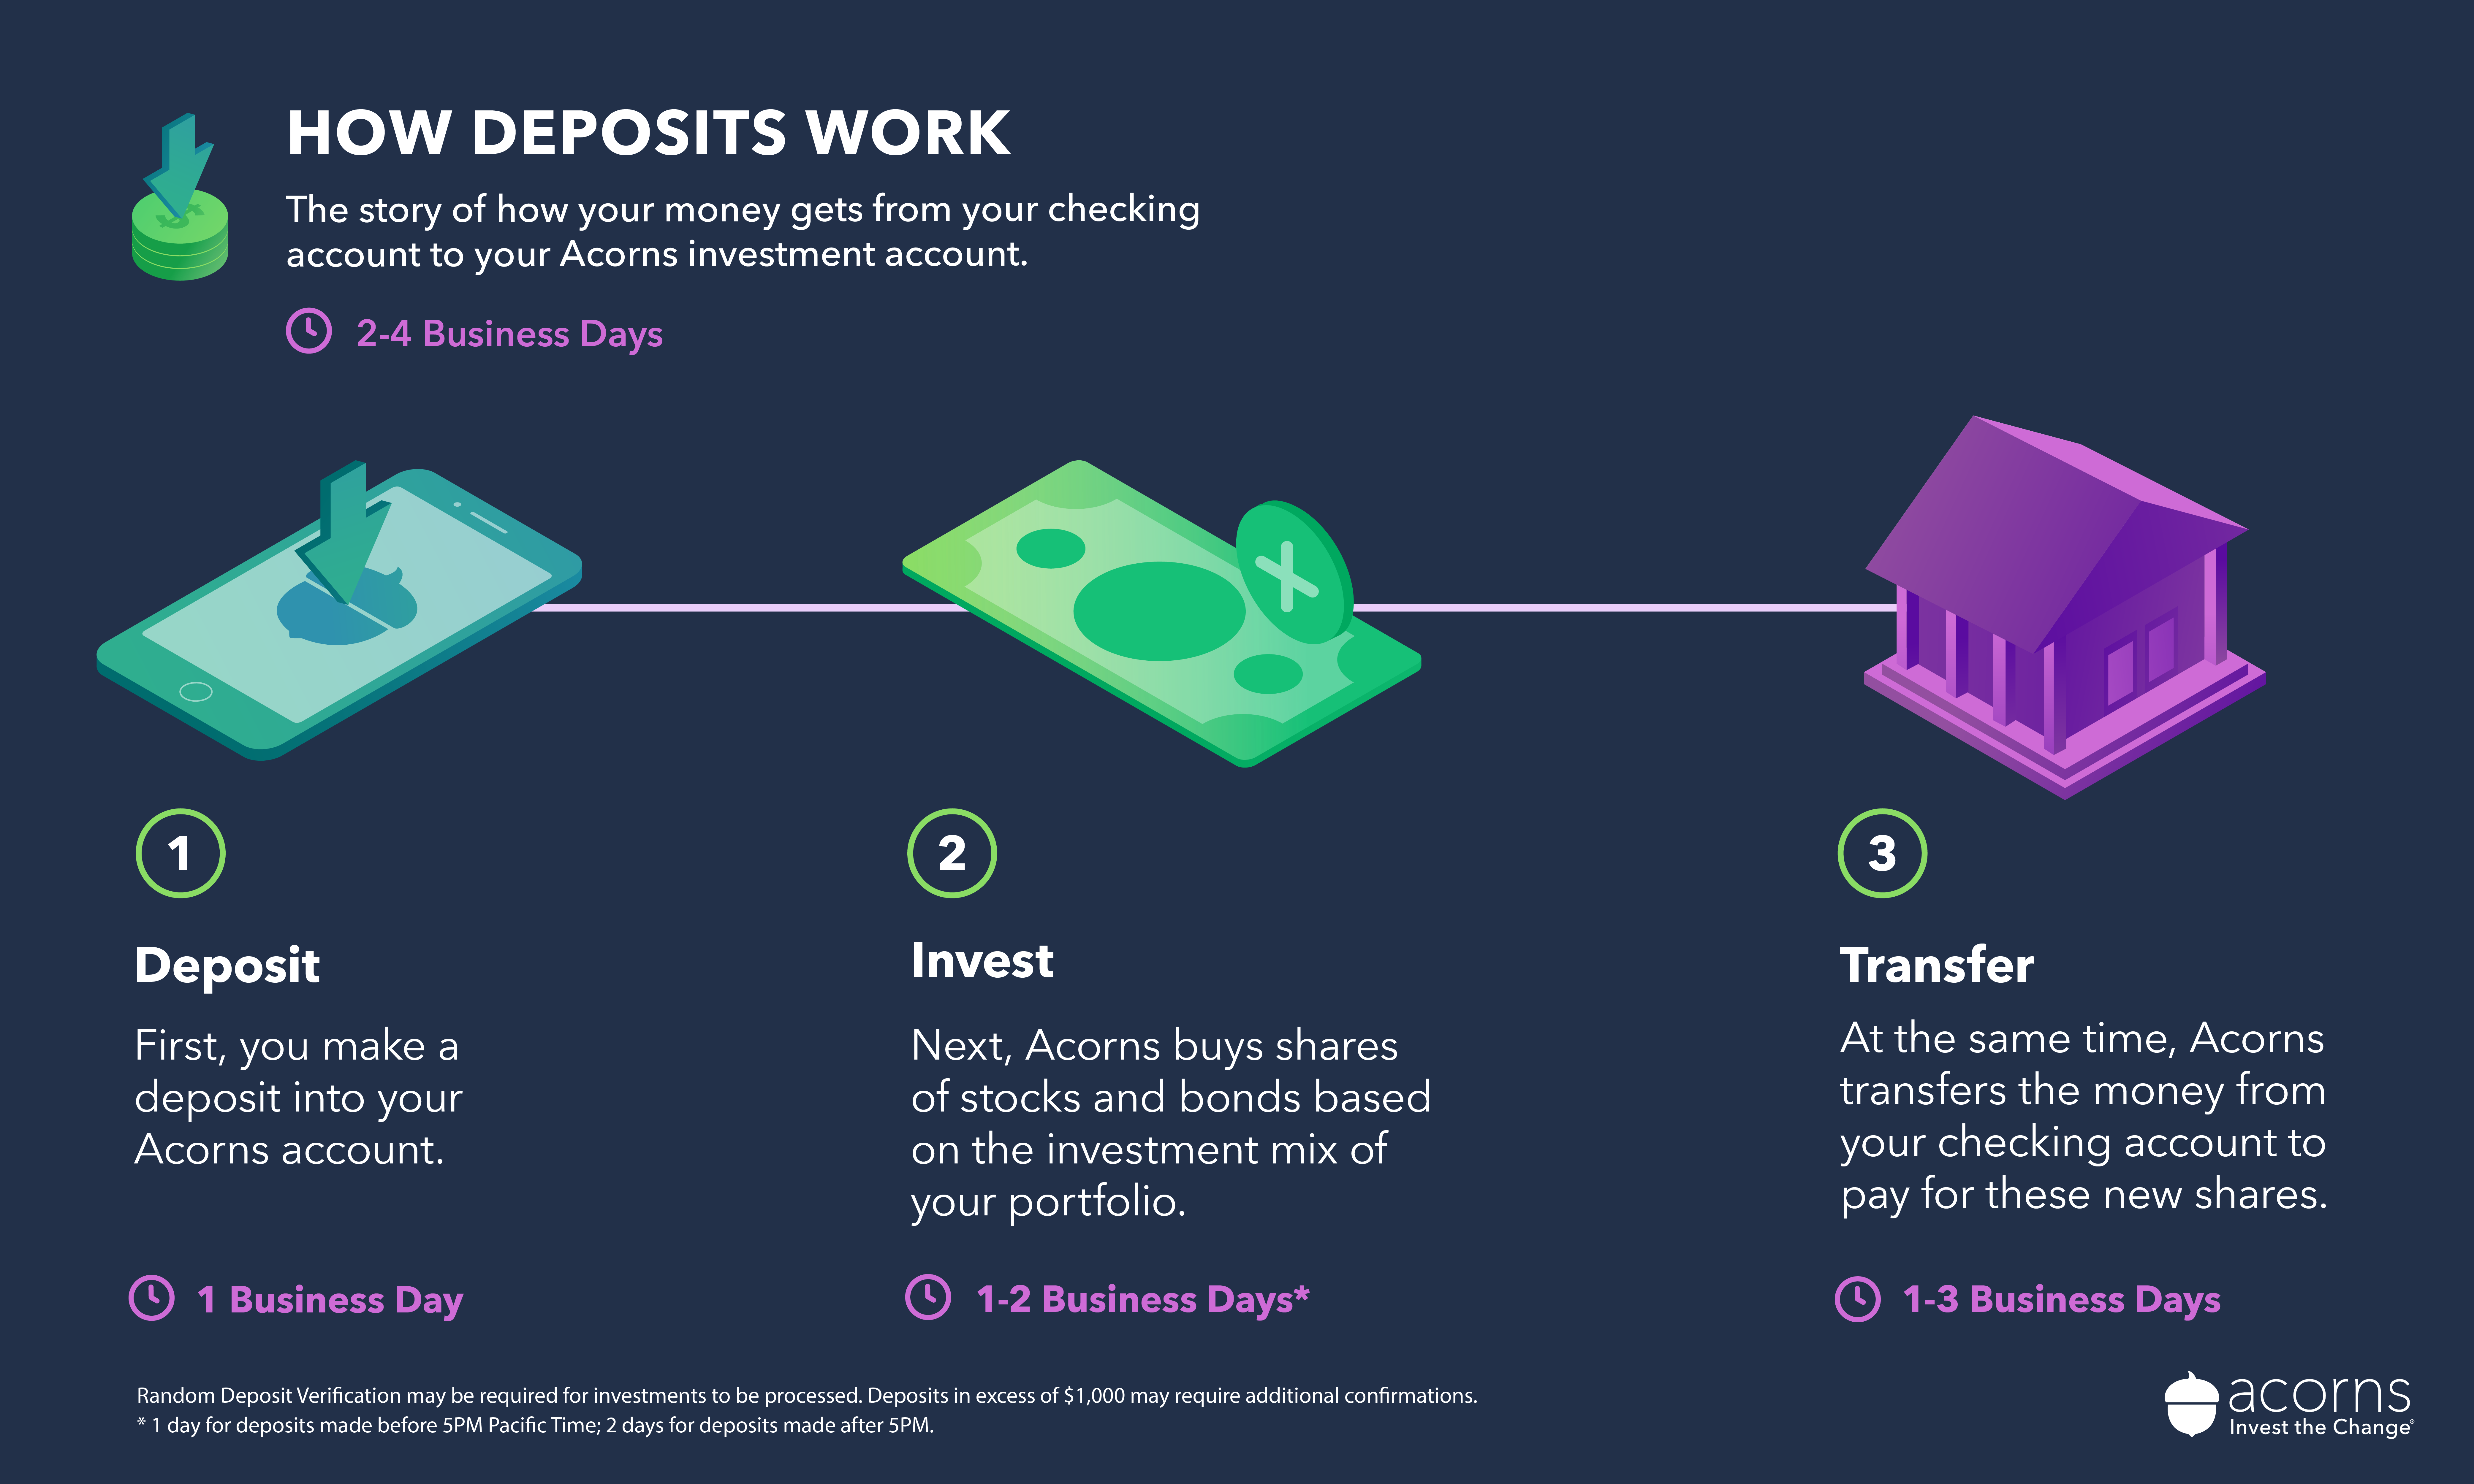 How long does it take to invest money? Acorns